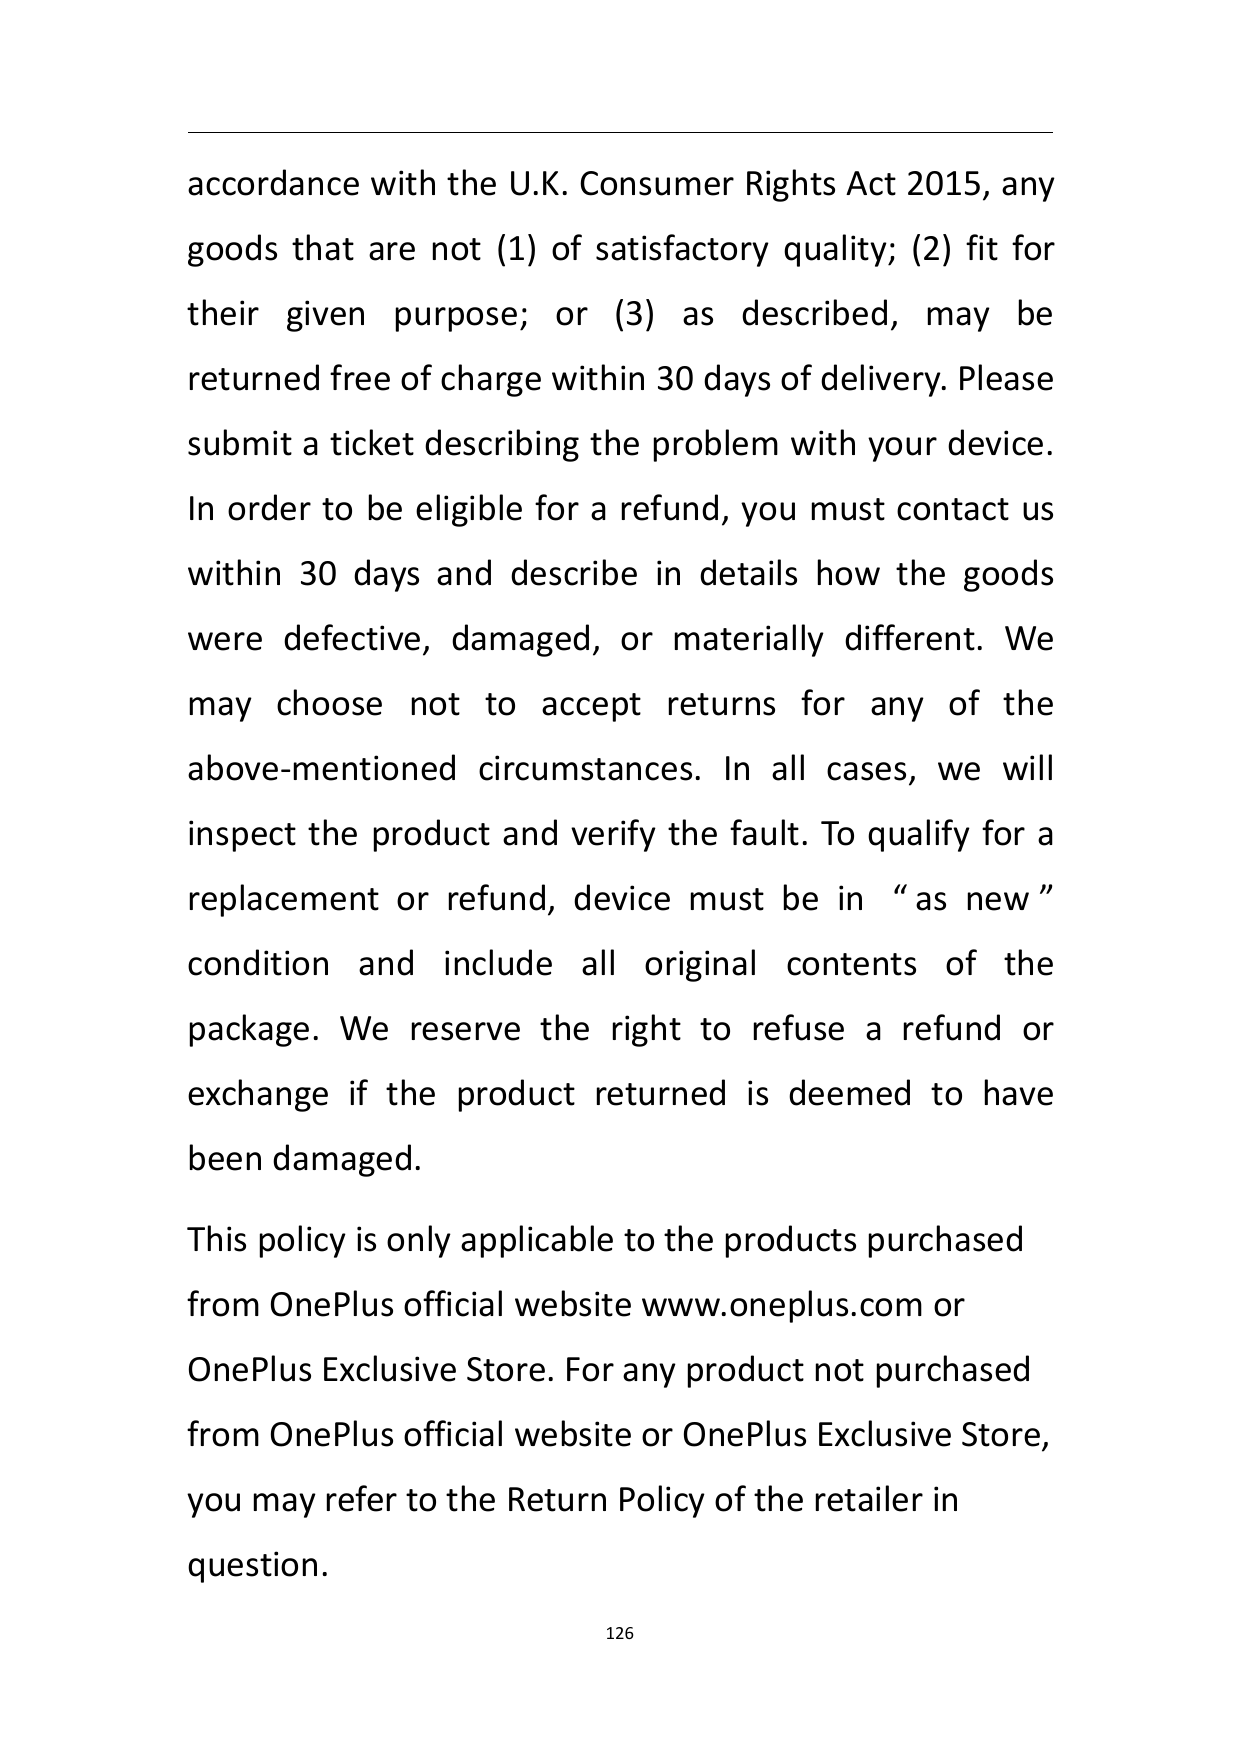 accordance with the U.K. Consumer Rights Act 2015, anygoods that are not (1) of satisfactory quality; (2) fit fortheir given pur